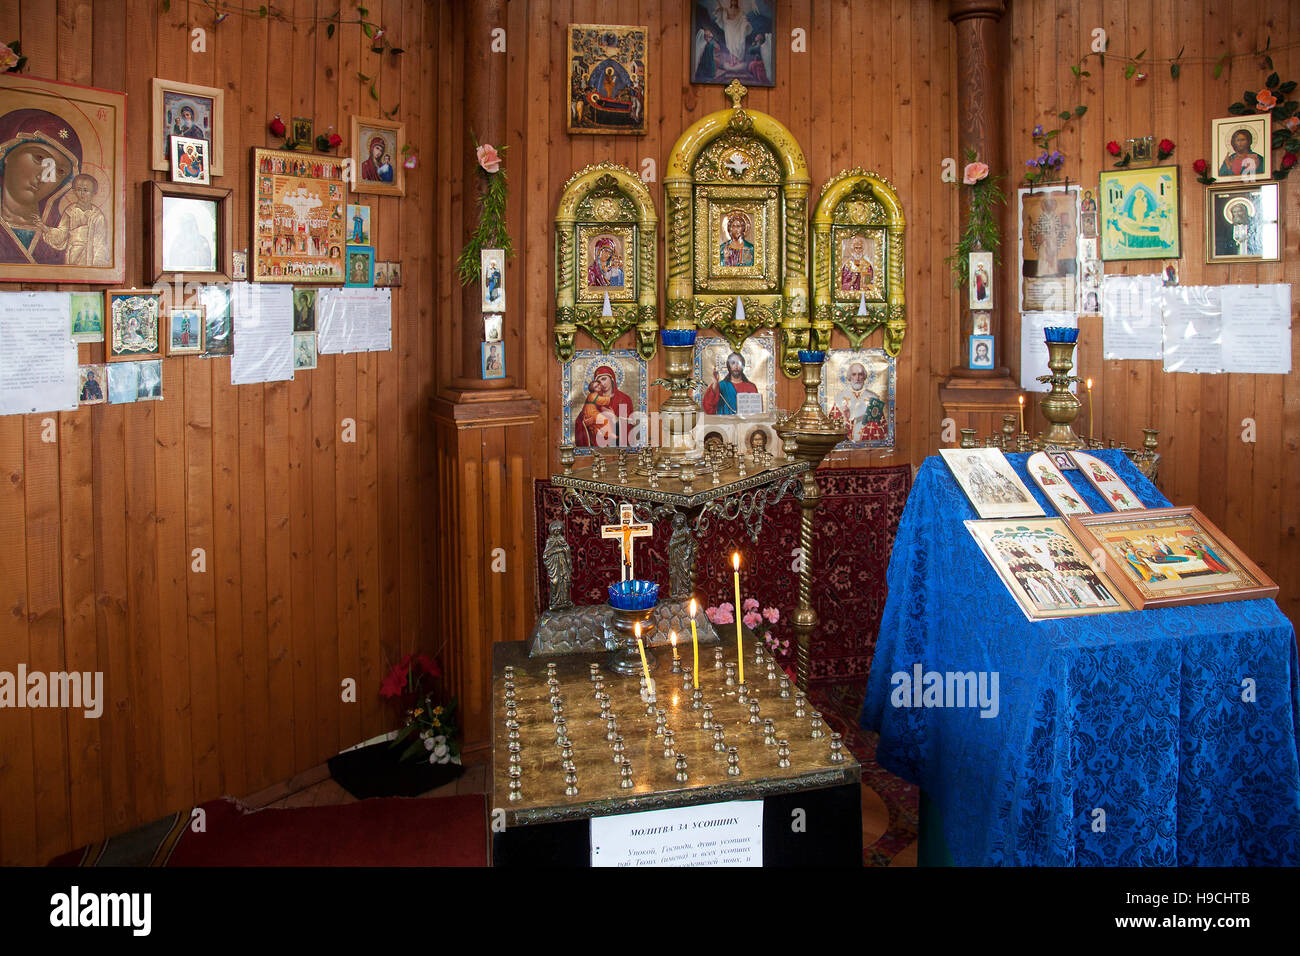 Interior of the wooden Russian Orthodox church in Pomor style at Barentsburg, coal mining settlement at Isfjorden, Spitsbergen / Svalbard, Norway Stock Photo